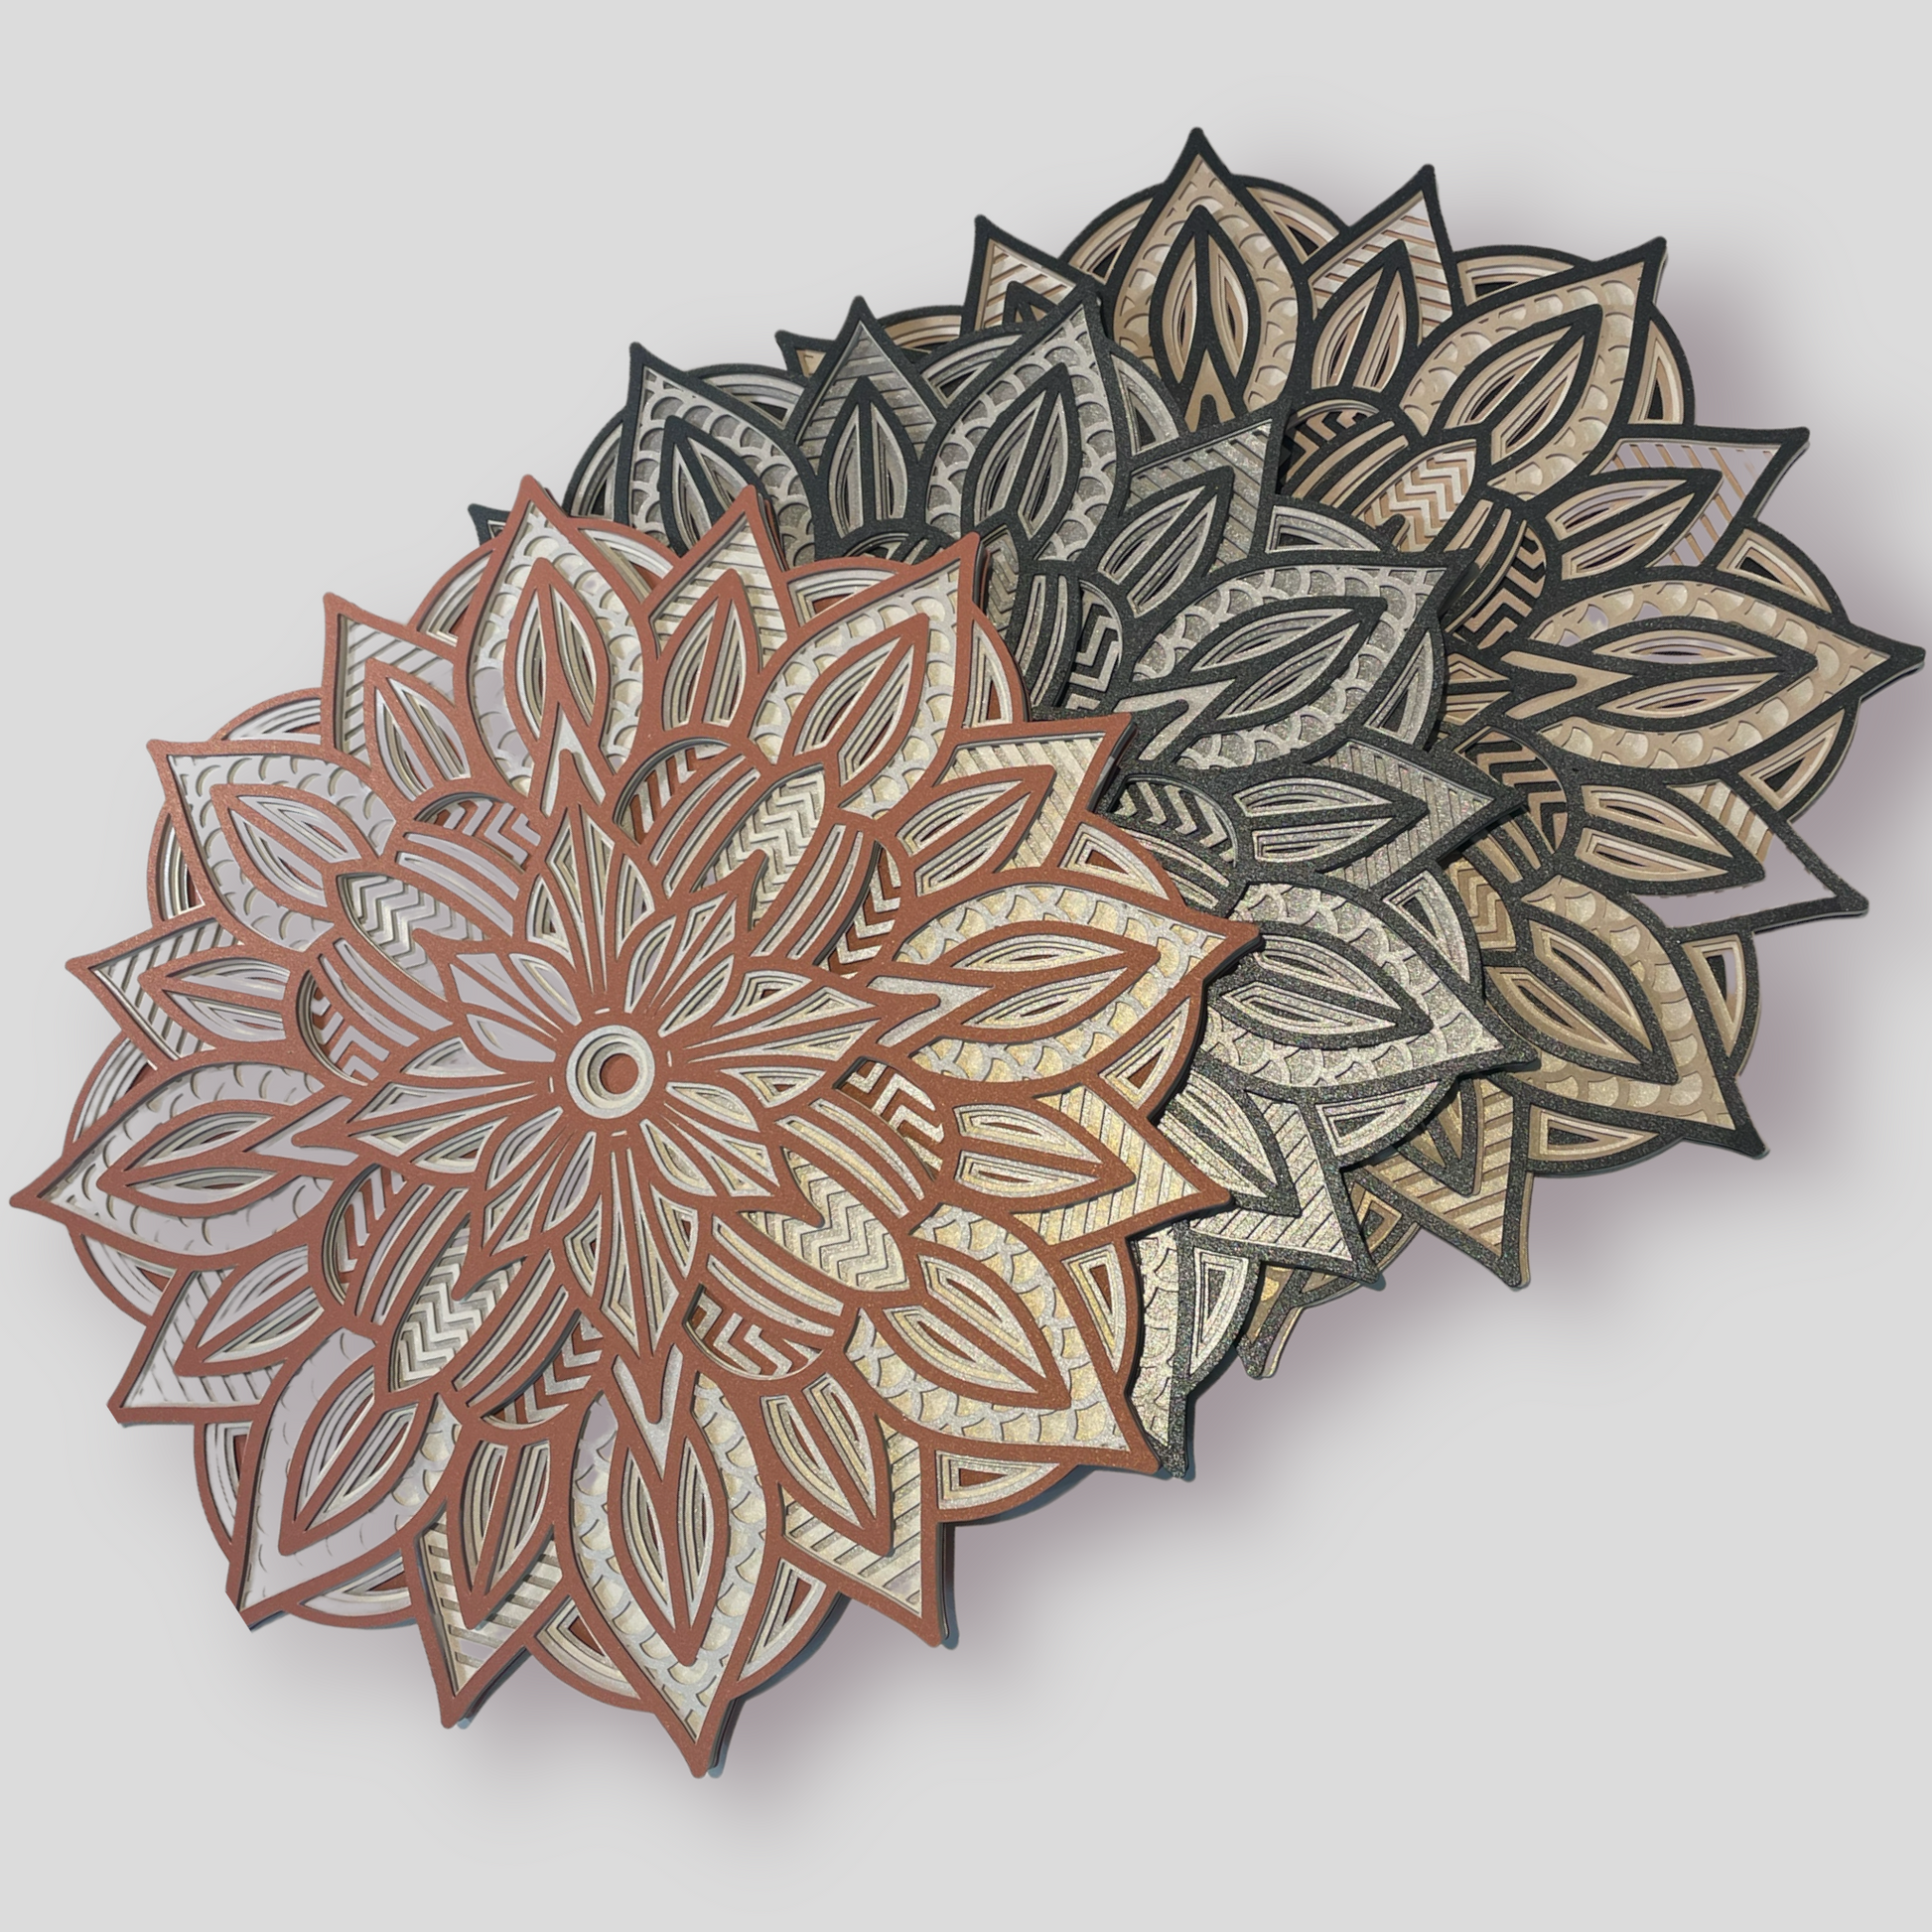 3 examples of our 3d Layered Mandala SVG Files in different colors. These 3d Layered Mandalas are perfectly sized for a 12 inch Shadow Box.  Grab your Cricut Maker and our instant download 3d Layered Mandala SVG Files.  Follow along with the complete Mandala tutorial included with your purchase. Find your favorite 3d Layered Mandala design at www.homestitcherydecor.com